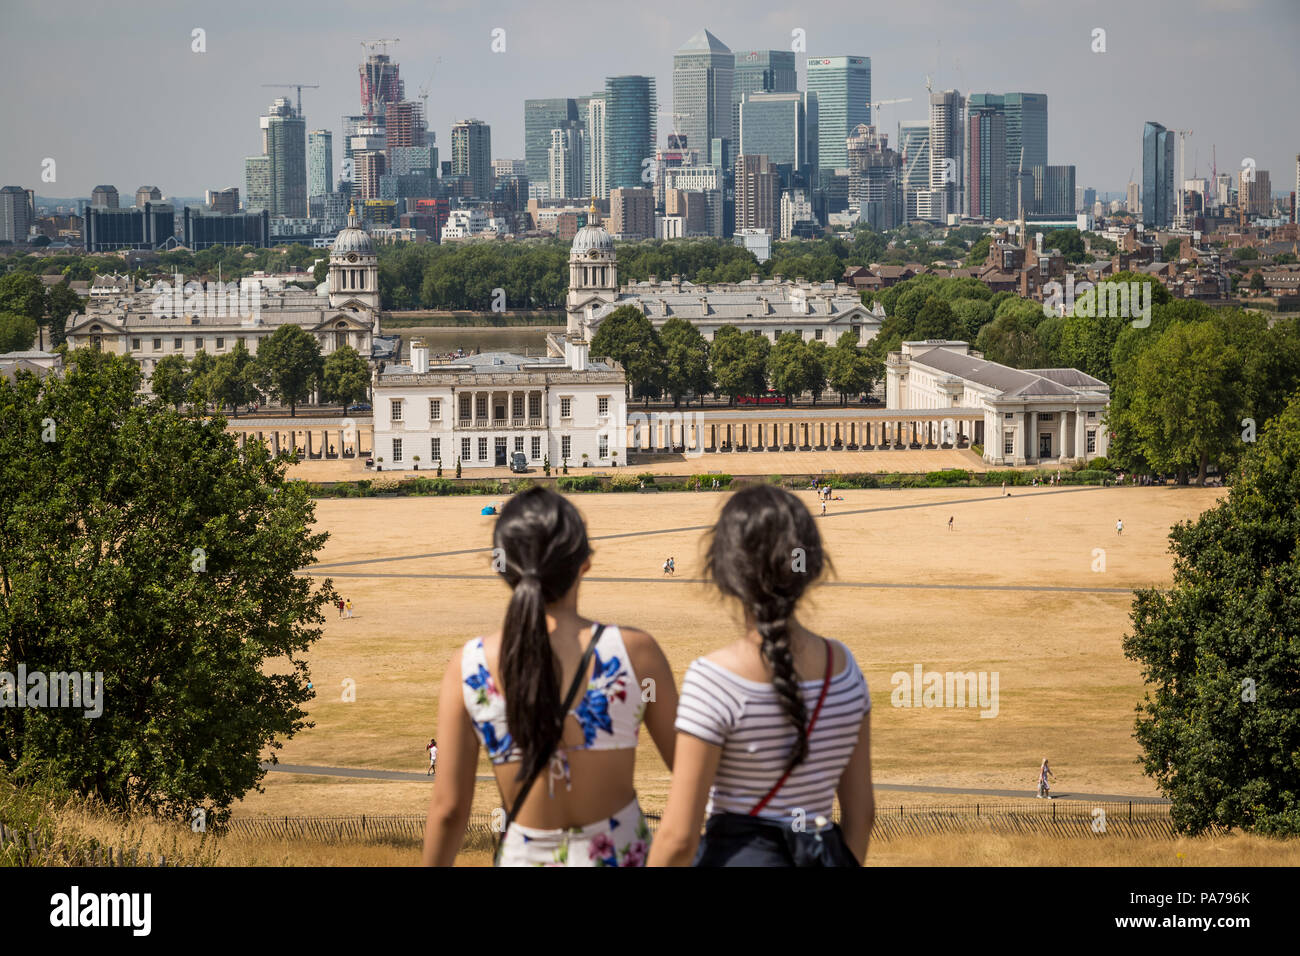 London, UK. 21st July, 2018. UK Weather: Royal Greenwich Park with continuing dry grass drought during the summer heatwave with next week again expected to record highs of up to 30 degrees Celsius. UK.Credit: Guy Corbishley/Alamy Live News Stock Photo